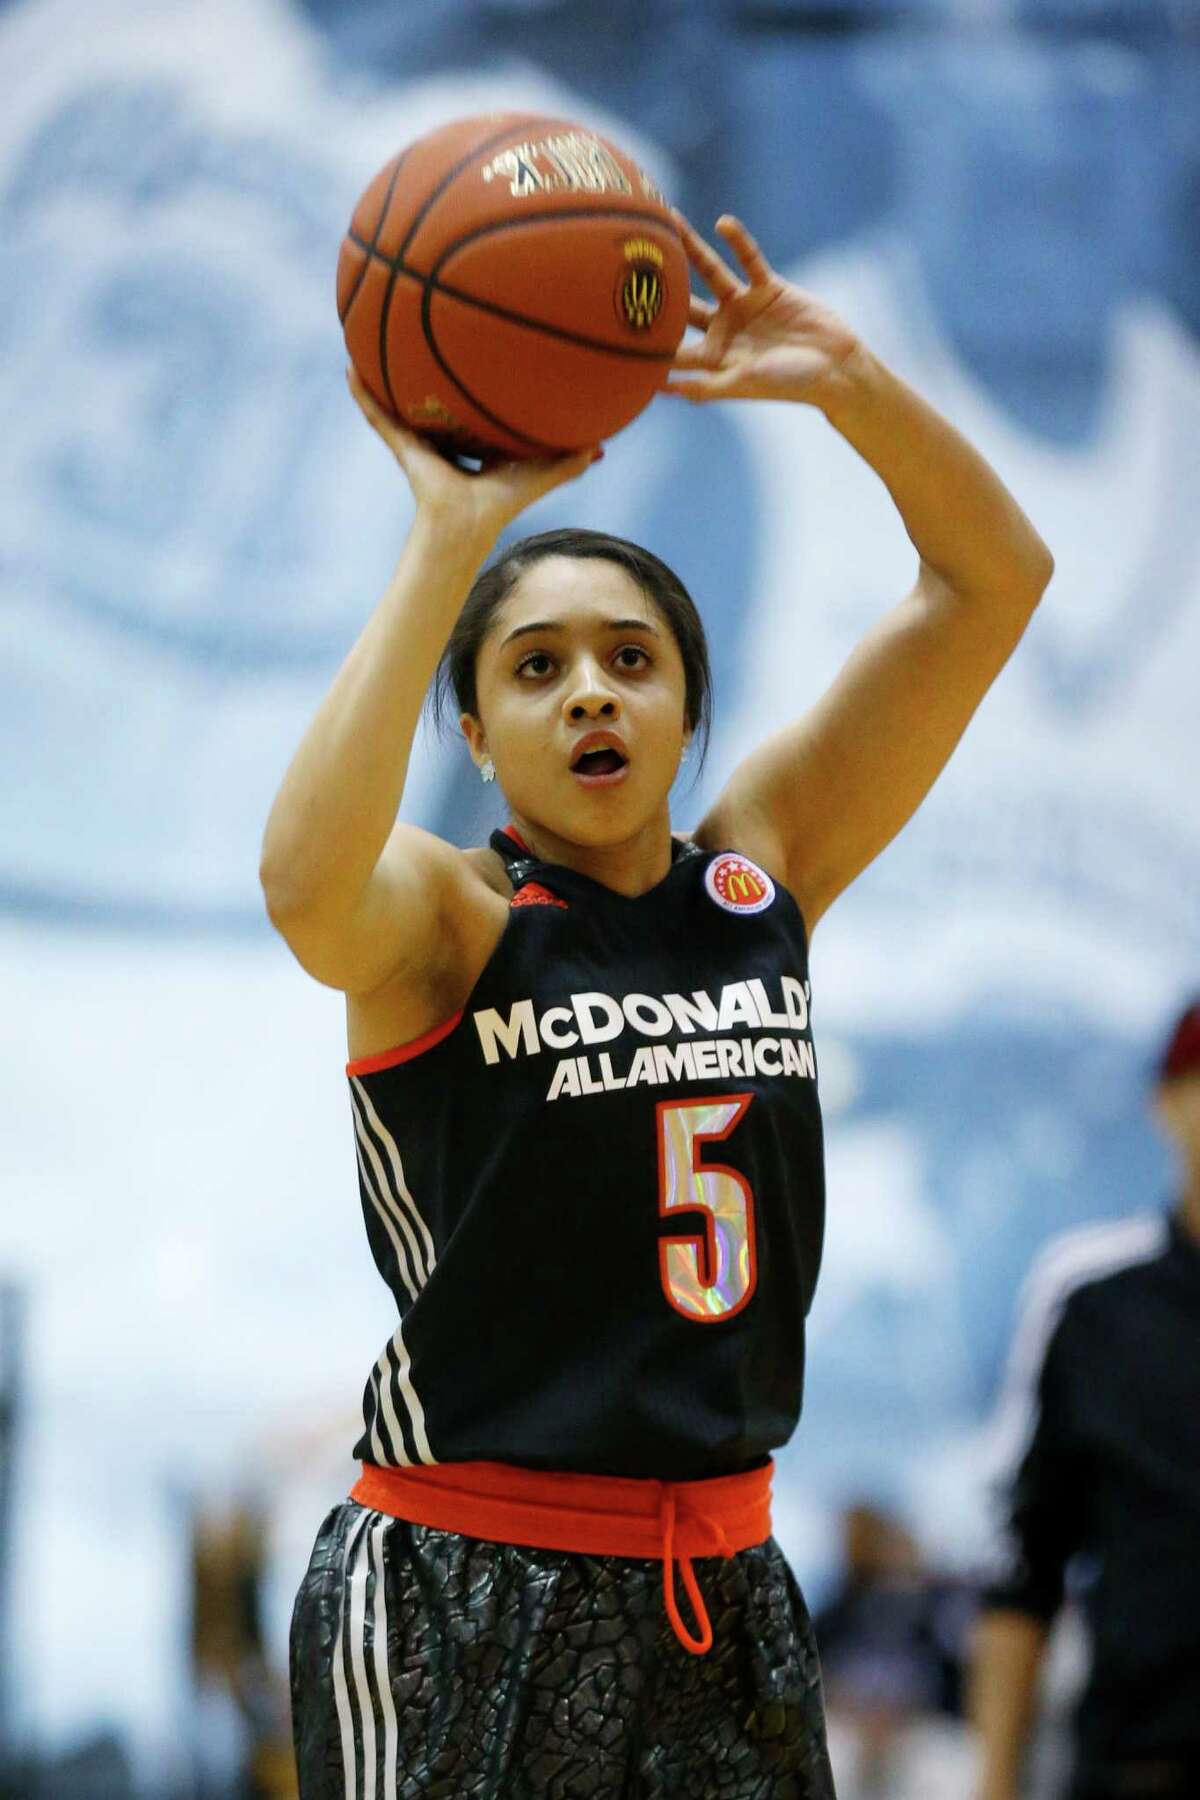 McDonald's West All-American Recee' Caldwell of San Antonio, Texas, competes in the three-point shootout during the McDonald's All-American Jam Fest at the University of Chicago in Chicago, on Monday, March 31, 2014. (AP Photo/Andrew A. Nelles)